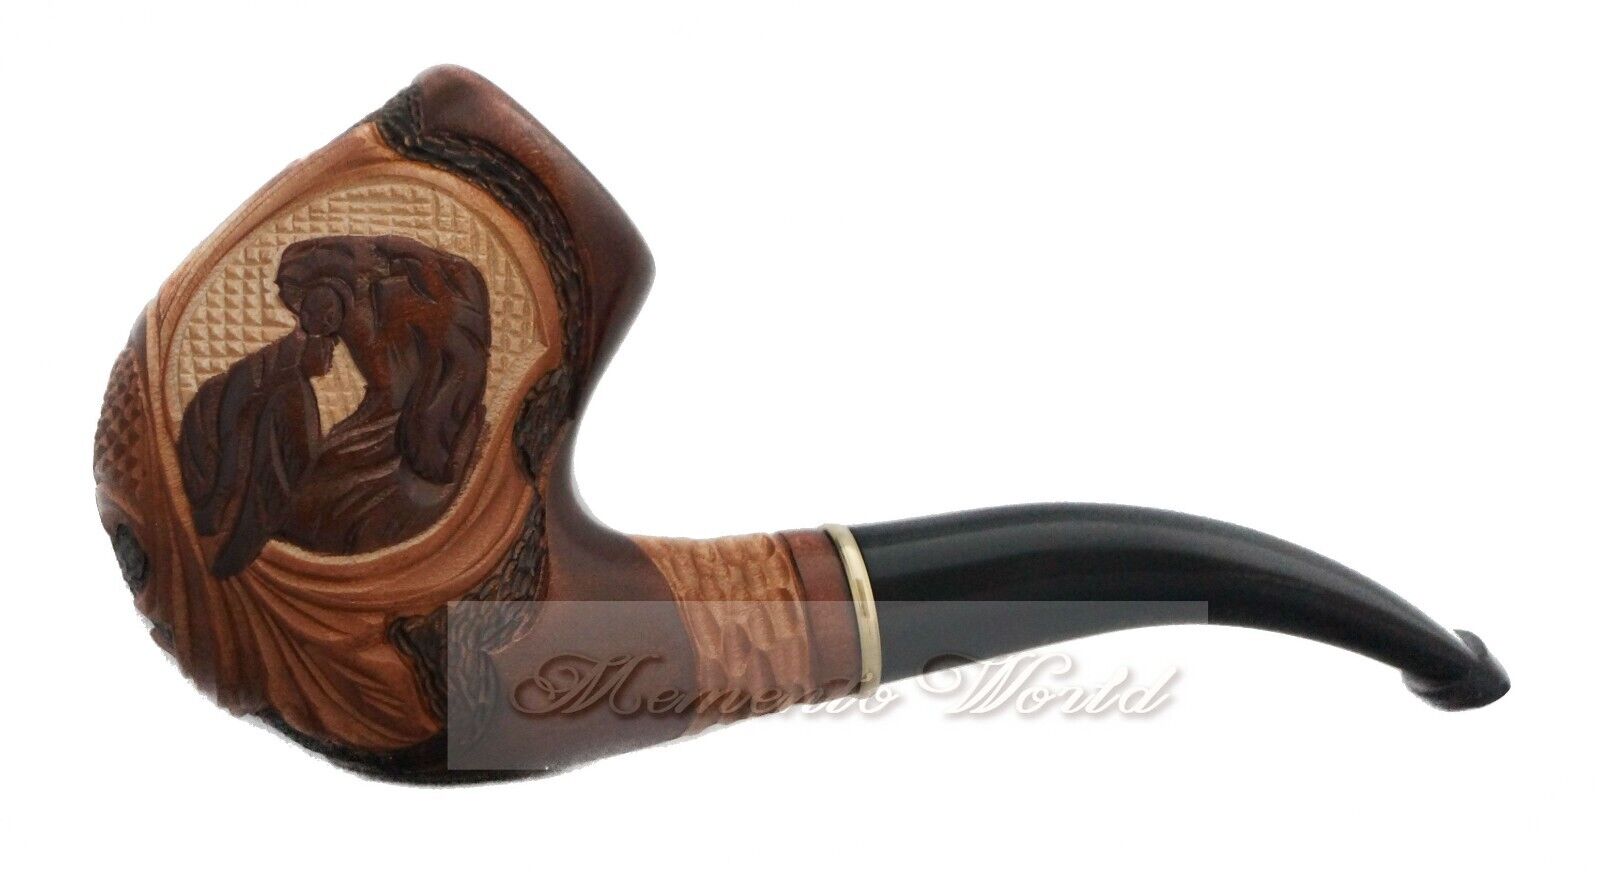 DIFFICULT HAND CARVED Wooden Tobacco Smoking Pipe for 9 mm * Dog with Duck *